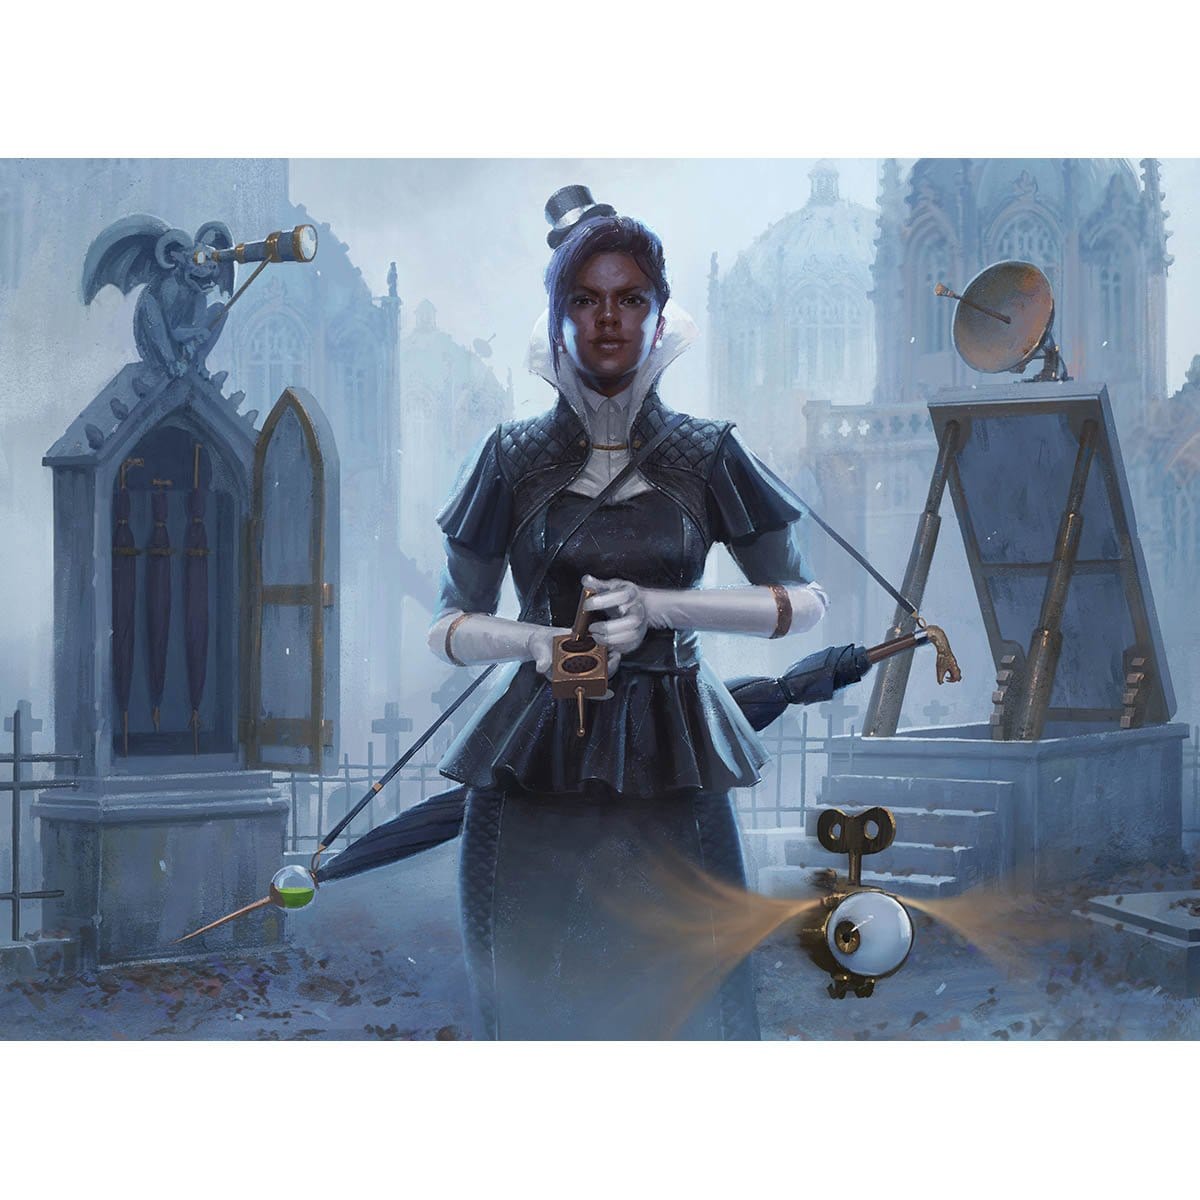 Graveyard Busybody Print - Print - Original Magic Art - Accessories for Magic the Gathering and other card games